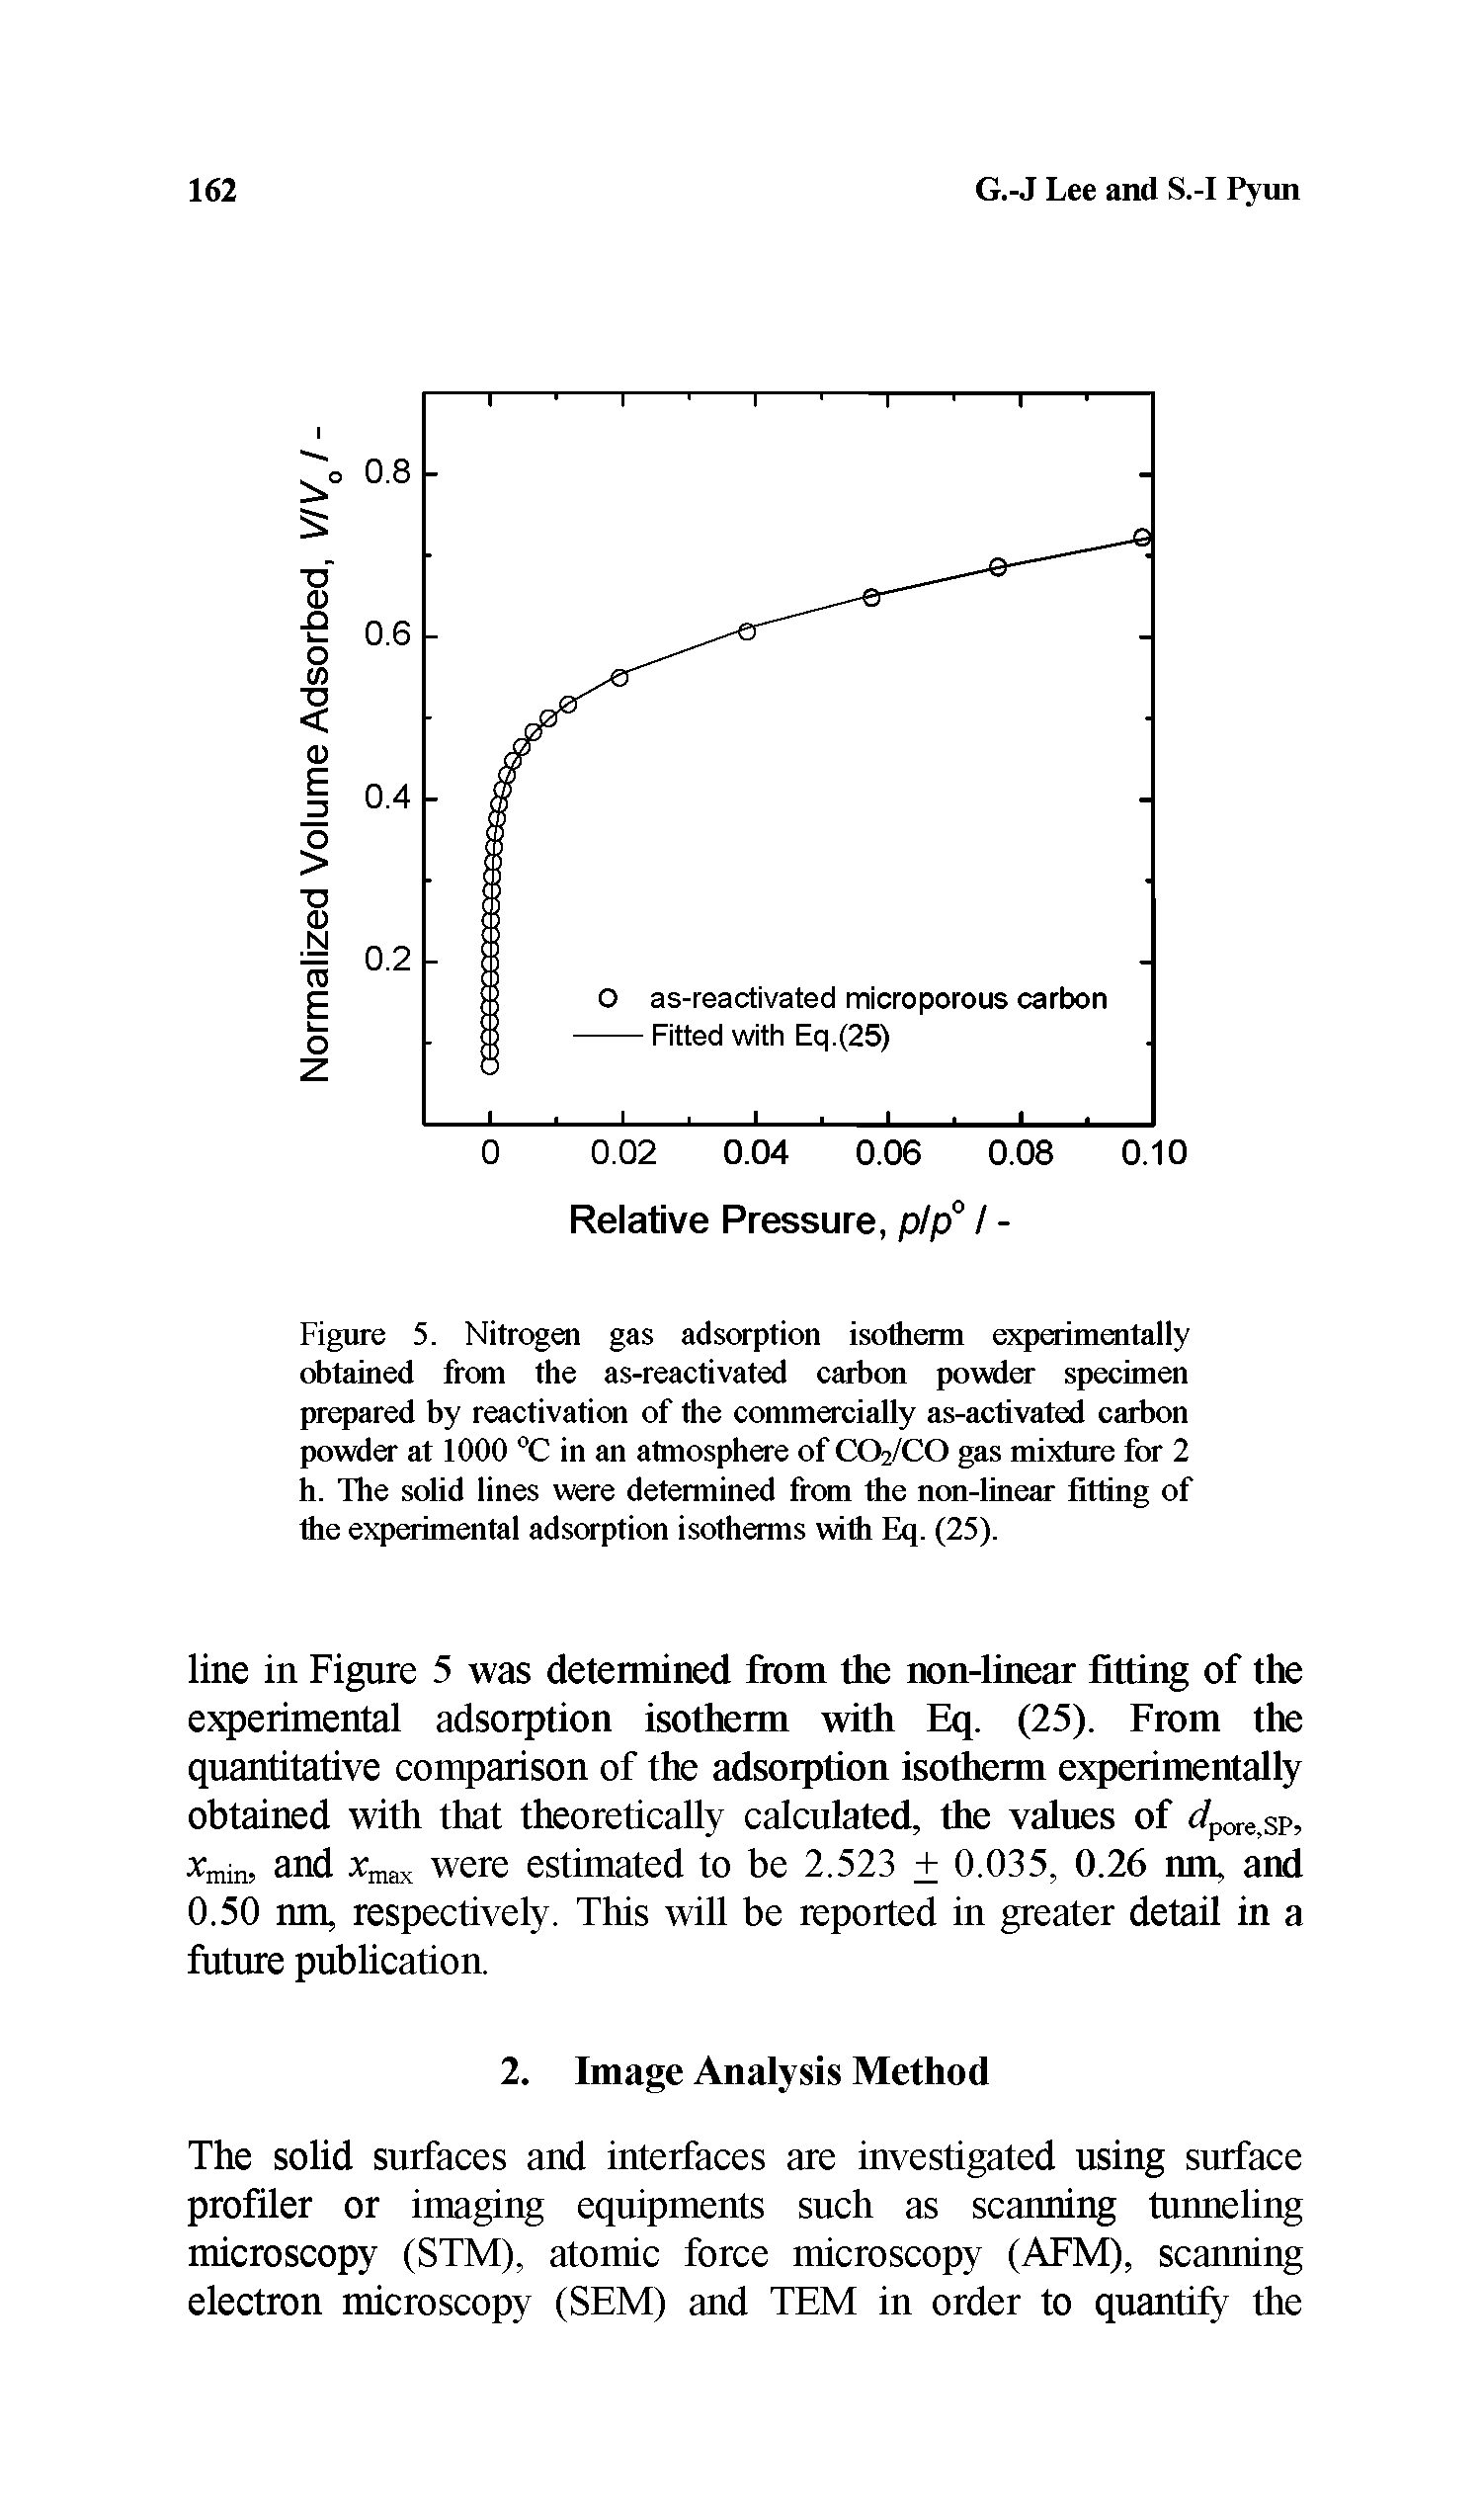 Figure 5. Nitrogen gas adsorption isotherm experimentally obtained from the as-reactivated carbon powder specimen prepared by reactivation of the commercially as-activated carbon powder at 1000 °C in an atmosphere of CO2/CO gas mixture for 2 h. The solid lines were determined from the non-linear fitting of the experimental adsorption isotherms with Eq. (25).